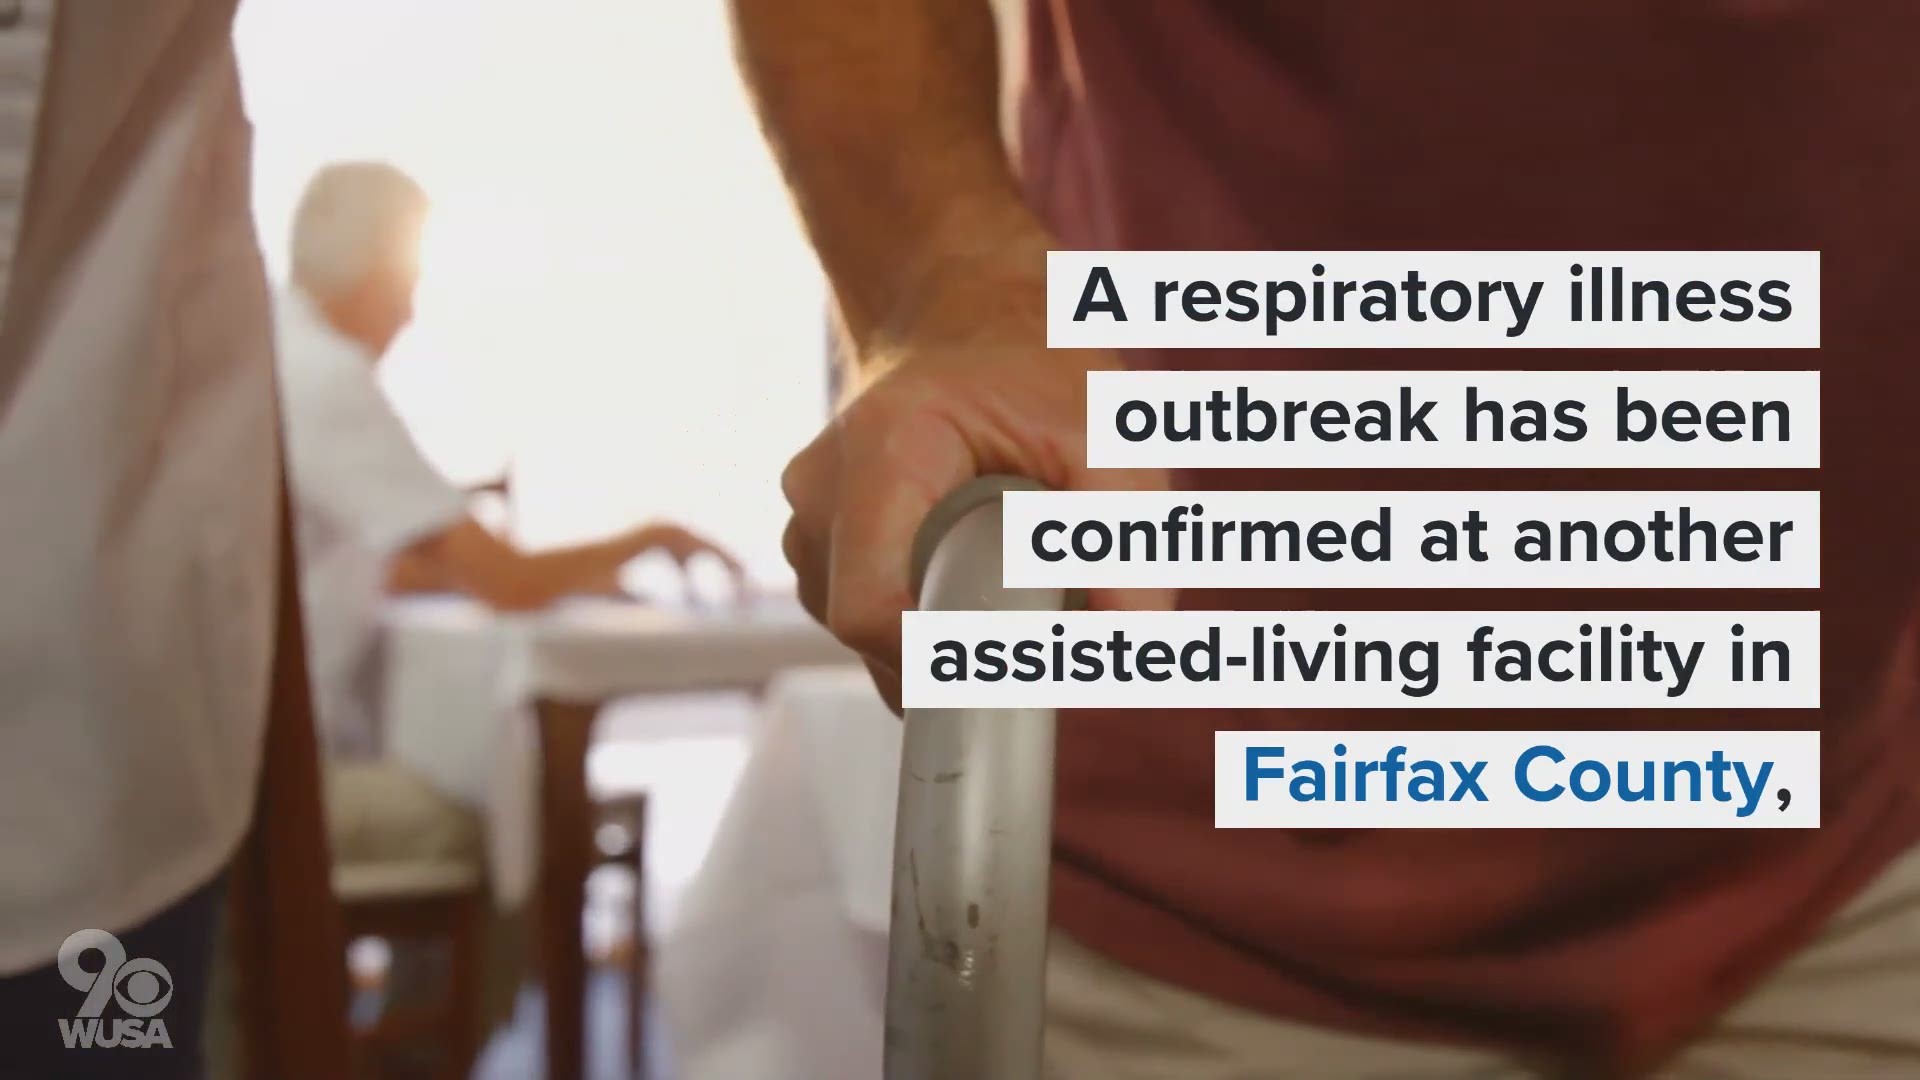 A respiratory illness outbreak has been confirmed at another assisted-living facility in Fairfax County, Va., health officials announced on Wednesday. 

Heatherwood Retirement Community located in Burke, Va. has also experienced an outbreak of a respiratory illness. It is unclear how many people have been impacted by the outbreak at this facility.